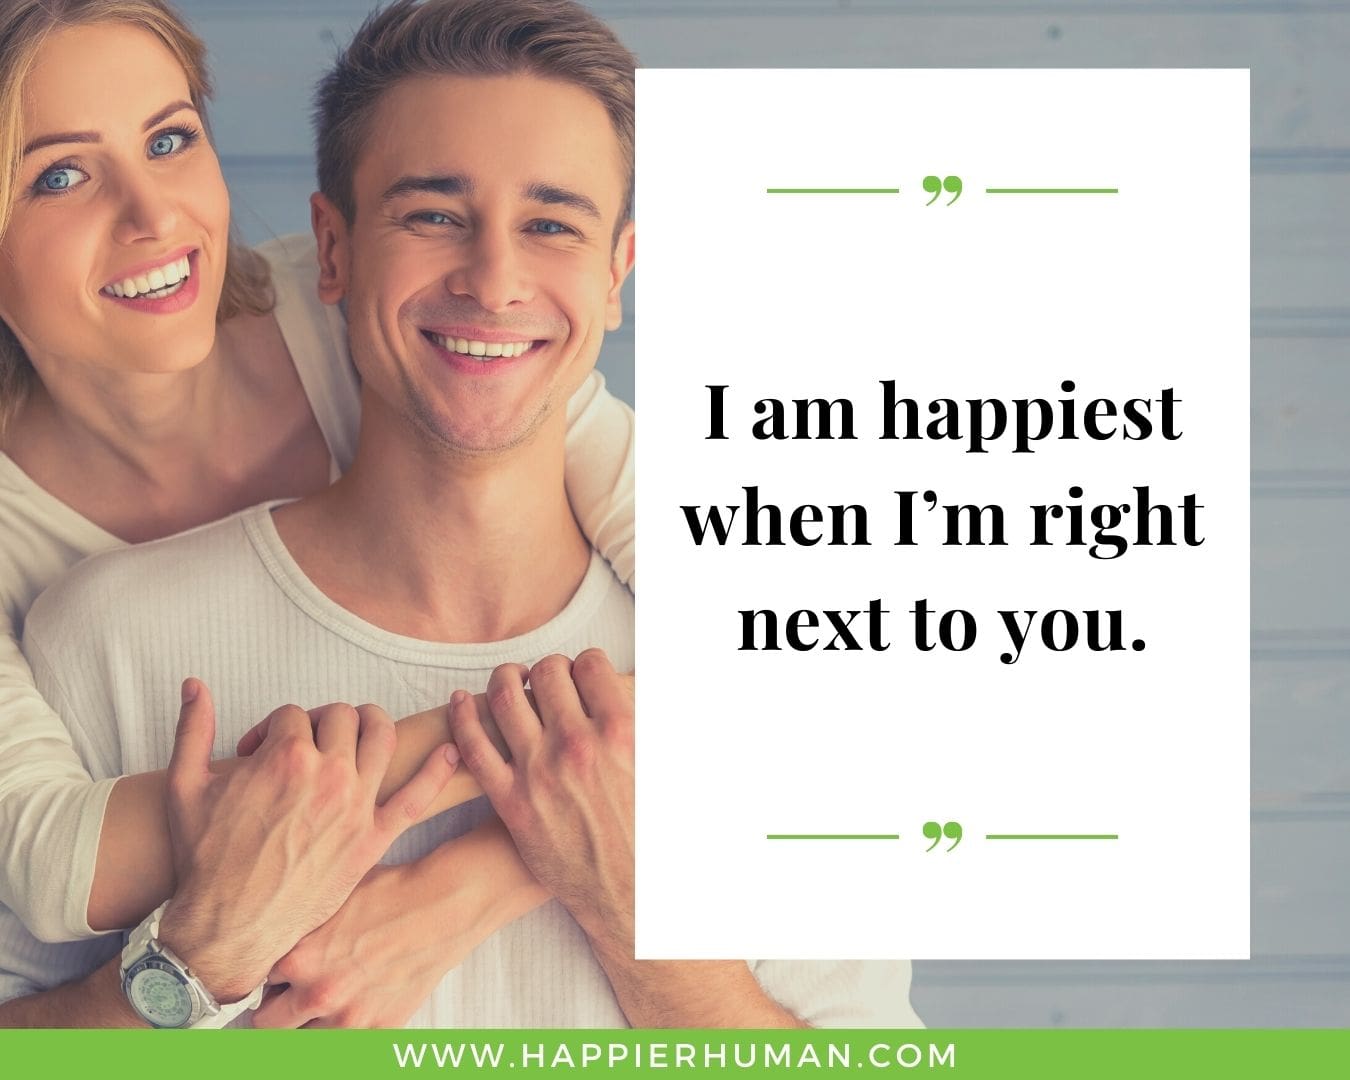 Short, Deep Love Quotes for Her - “I am happiest when I’m right next to you.”